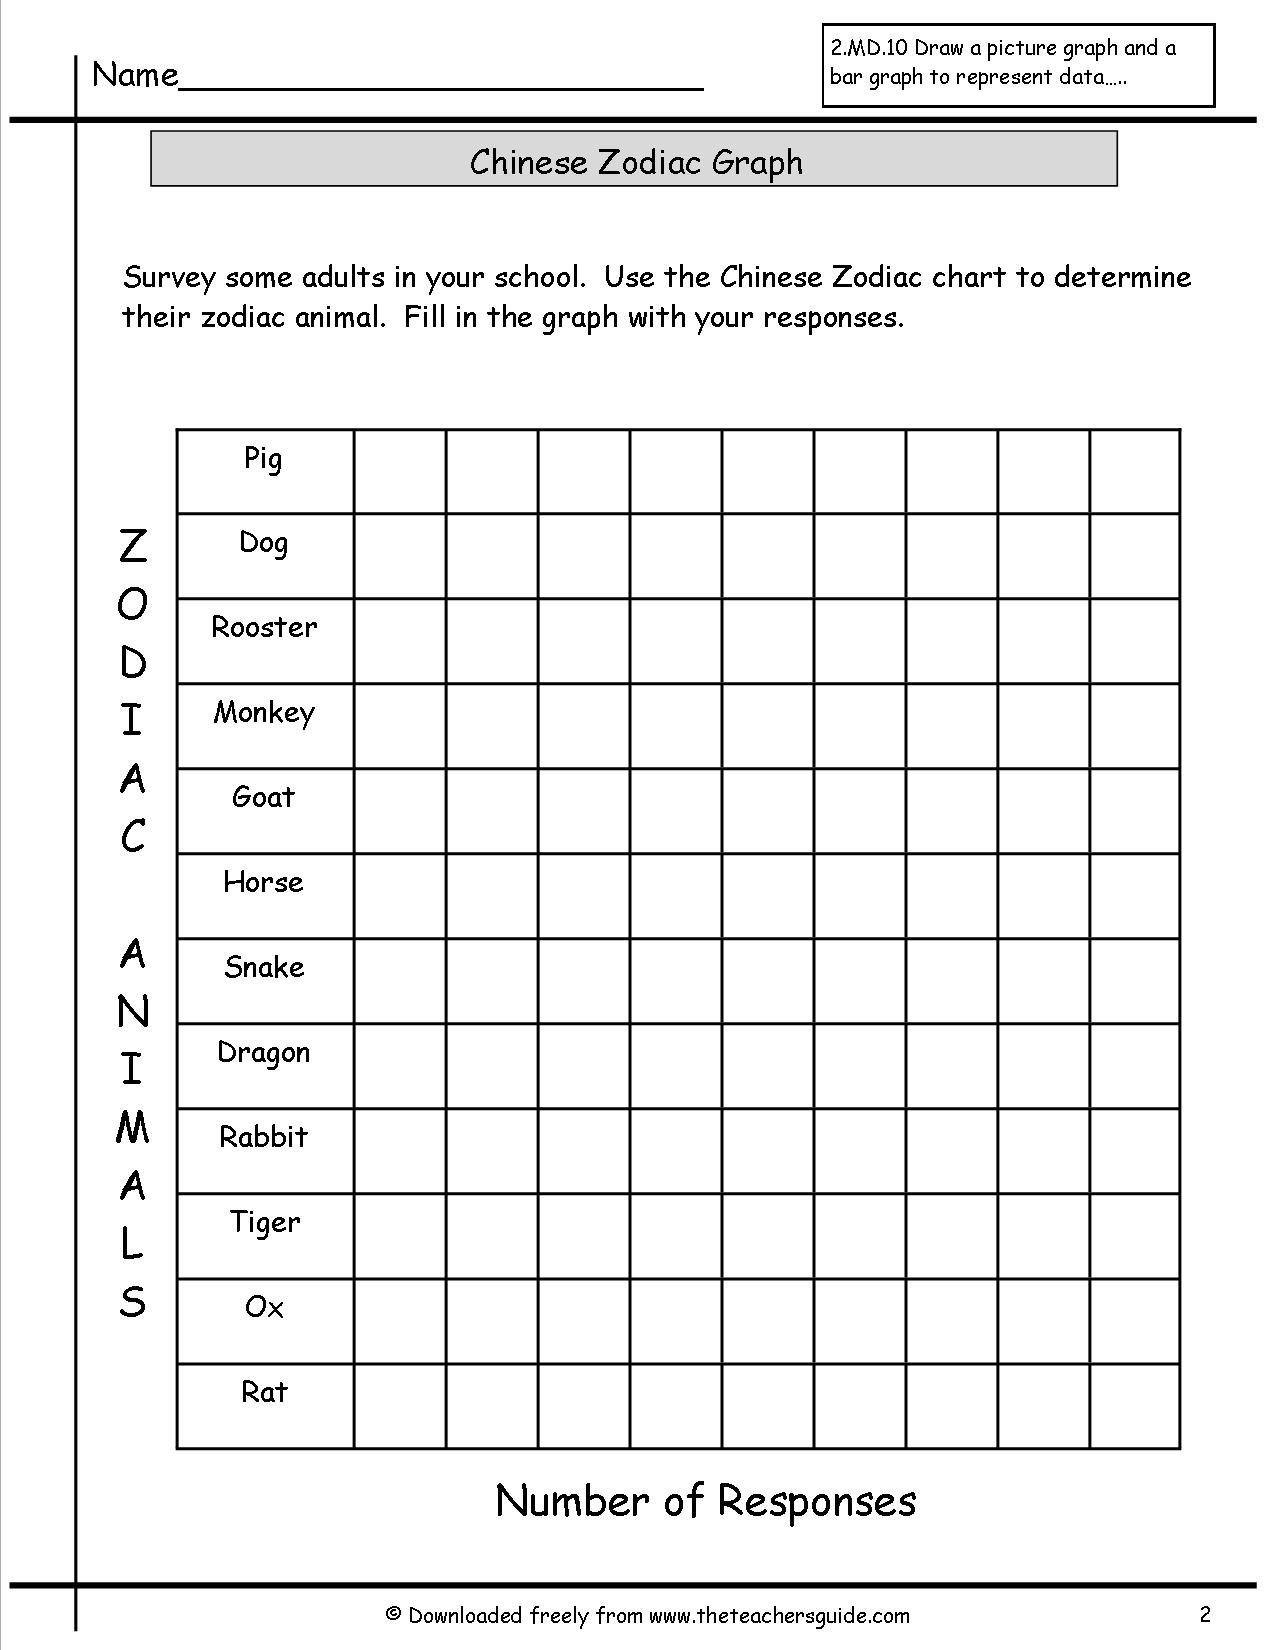 Reading And Creating Bar Graphs Worksheets From The Teacher's Guide Regarding Graphing Data Worksheets